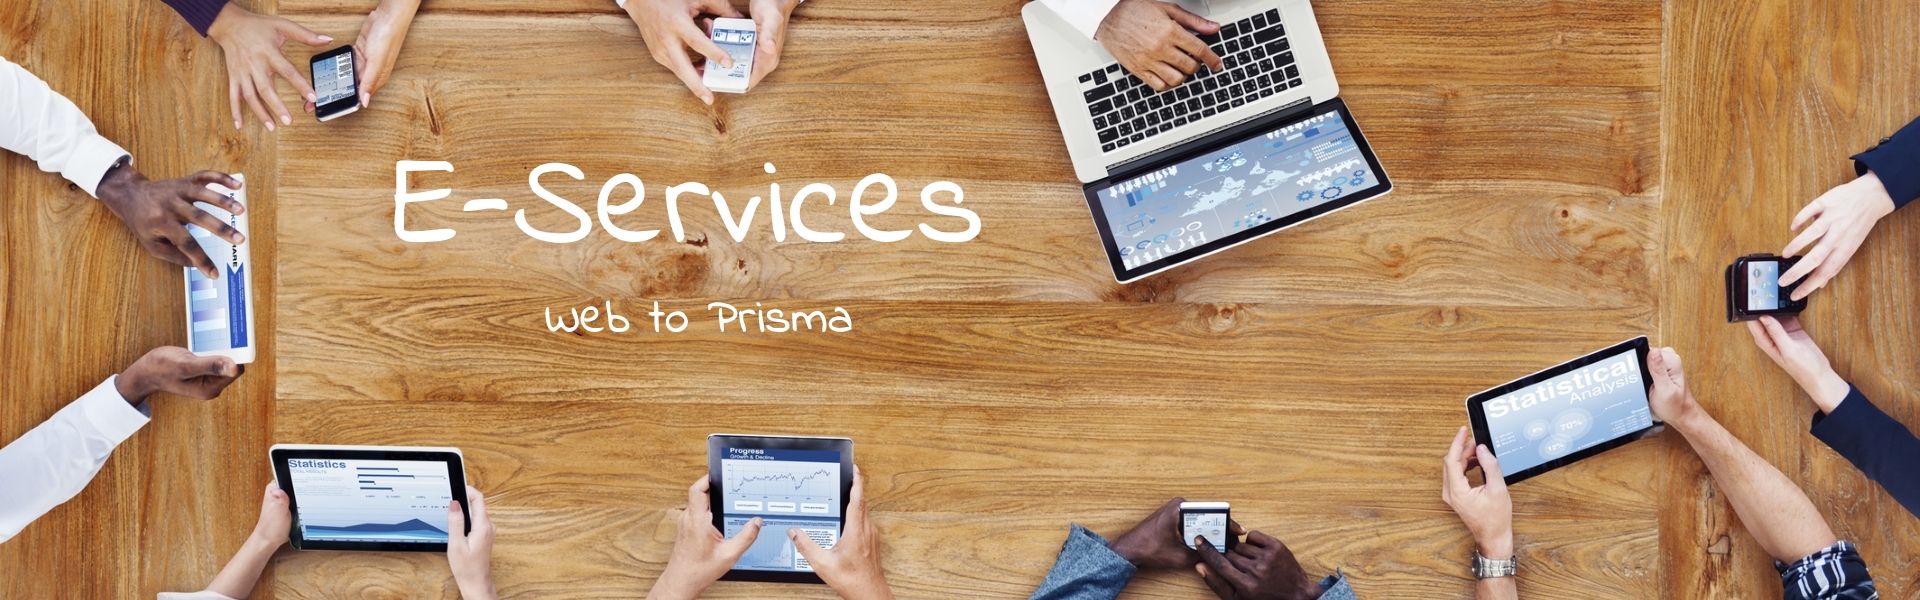 EServices